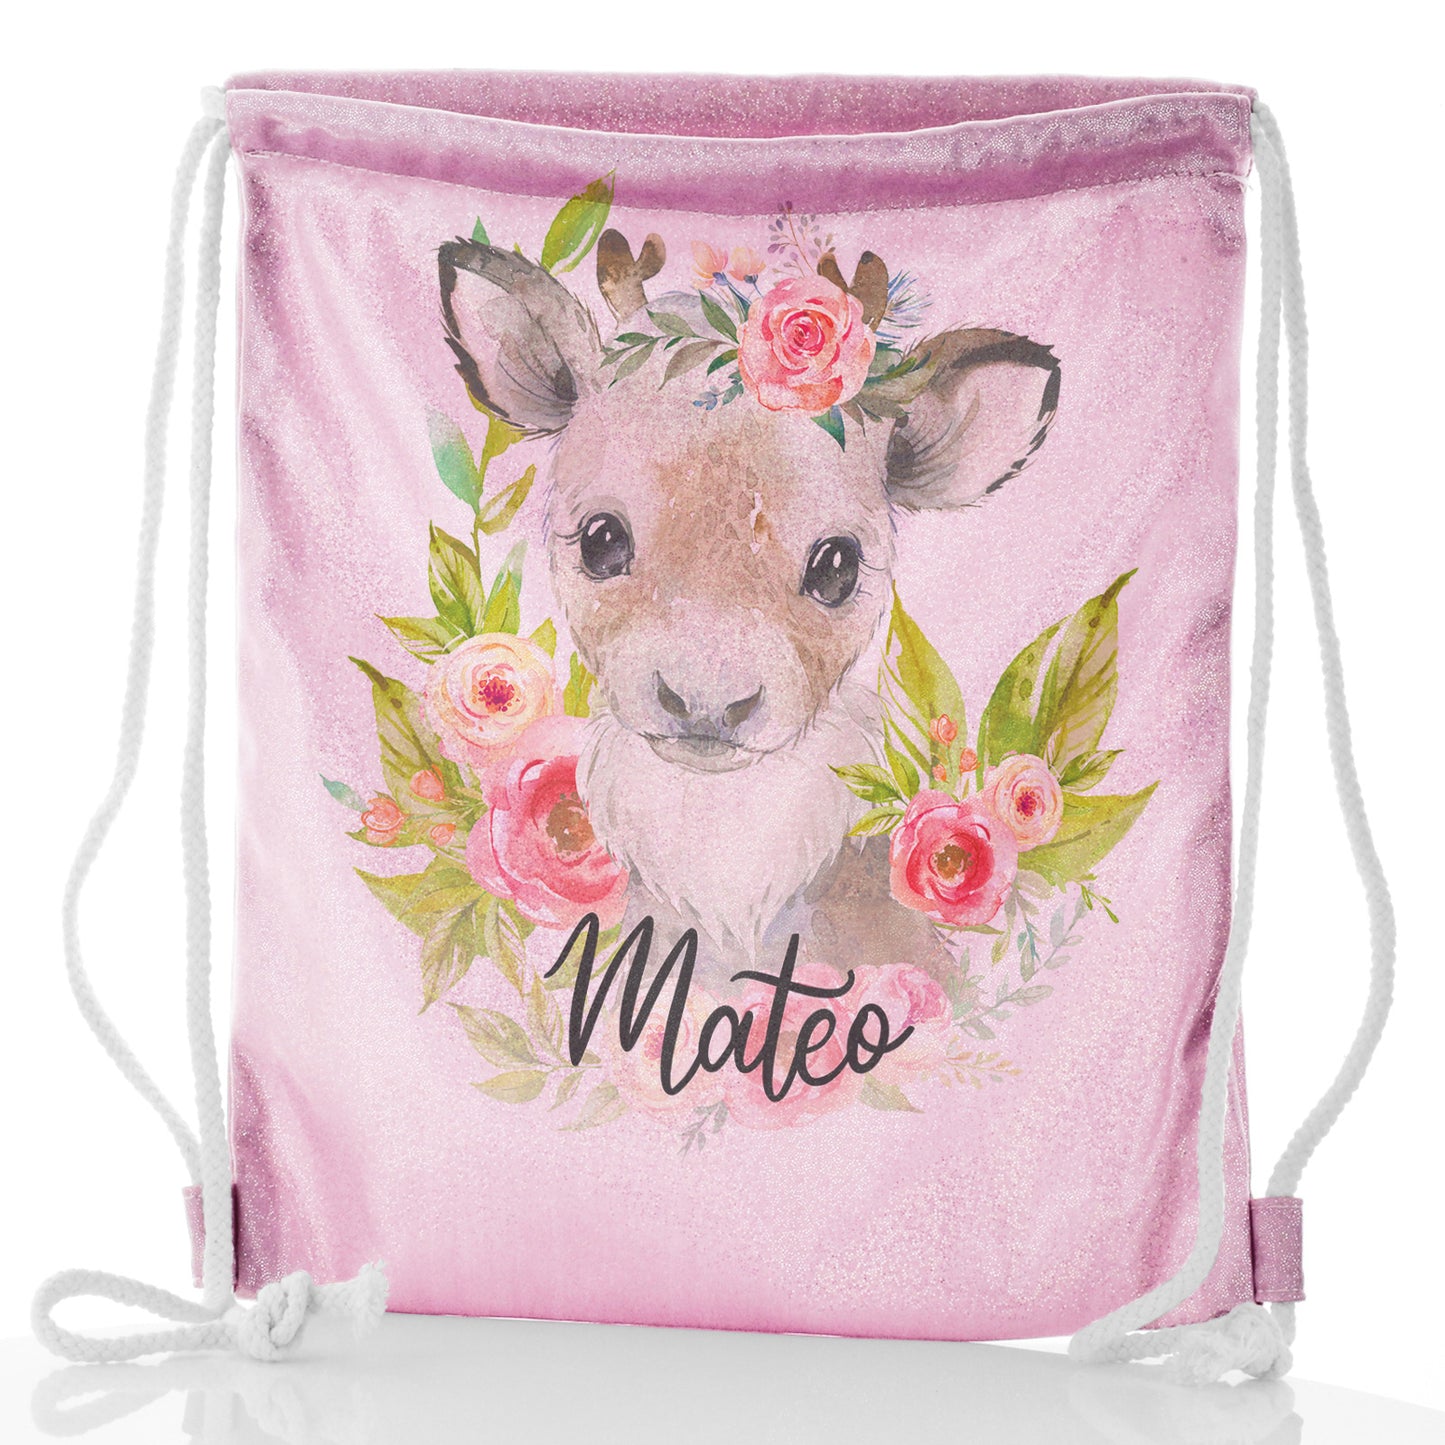 Personalised Glitter Drawstring Backpack with Reindeer Pink Flowers and Cute Text